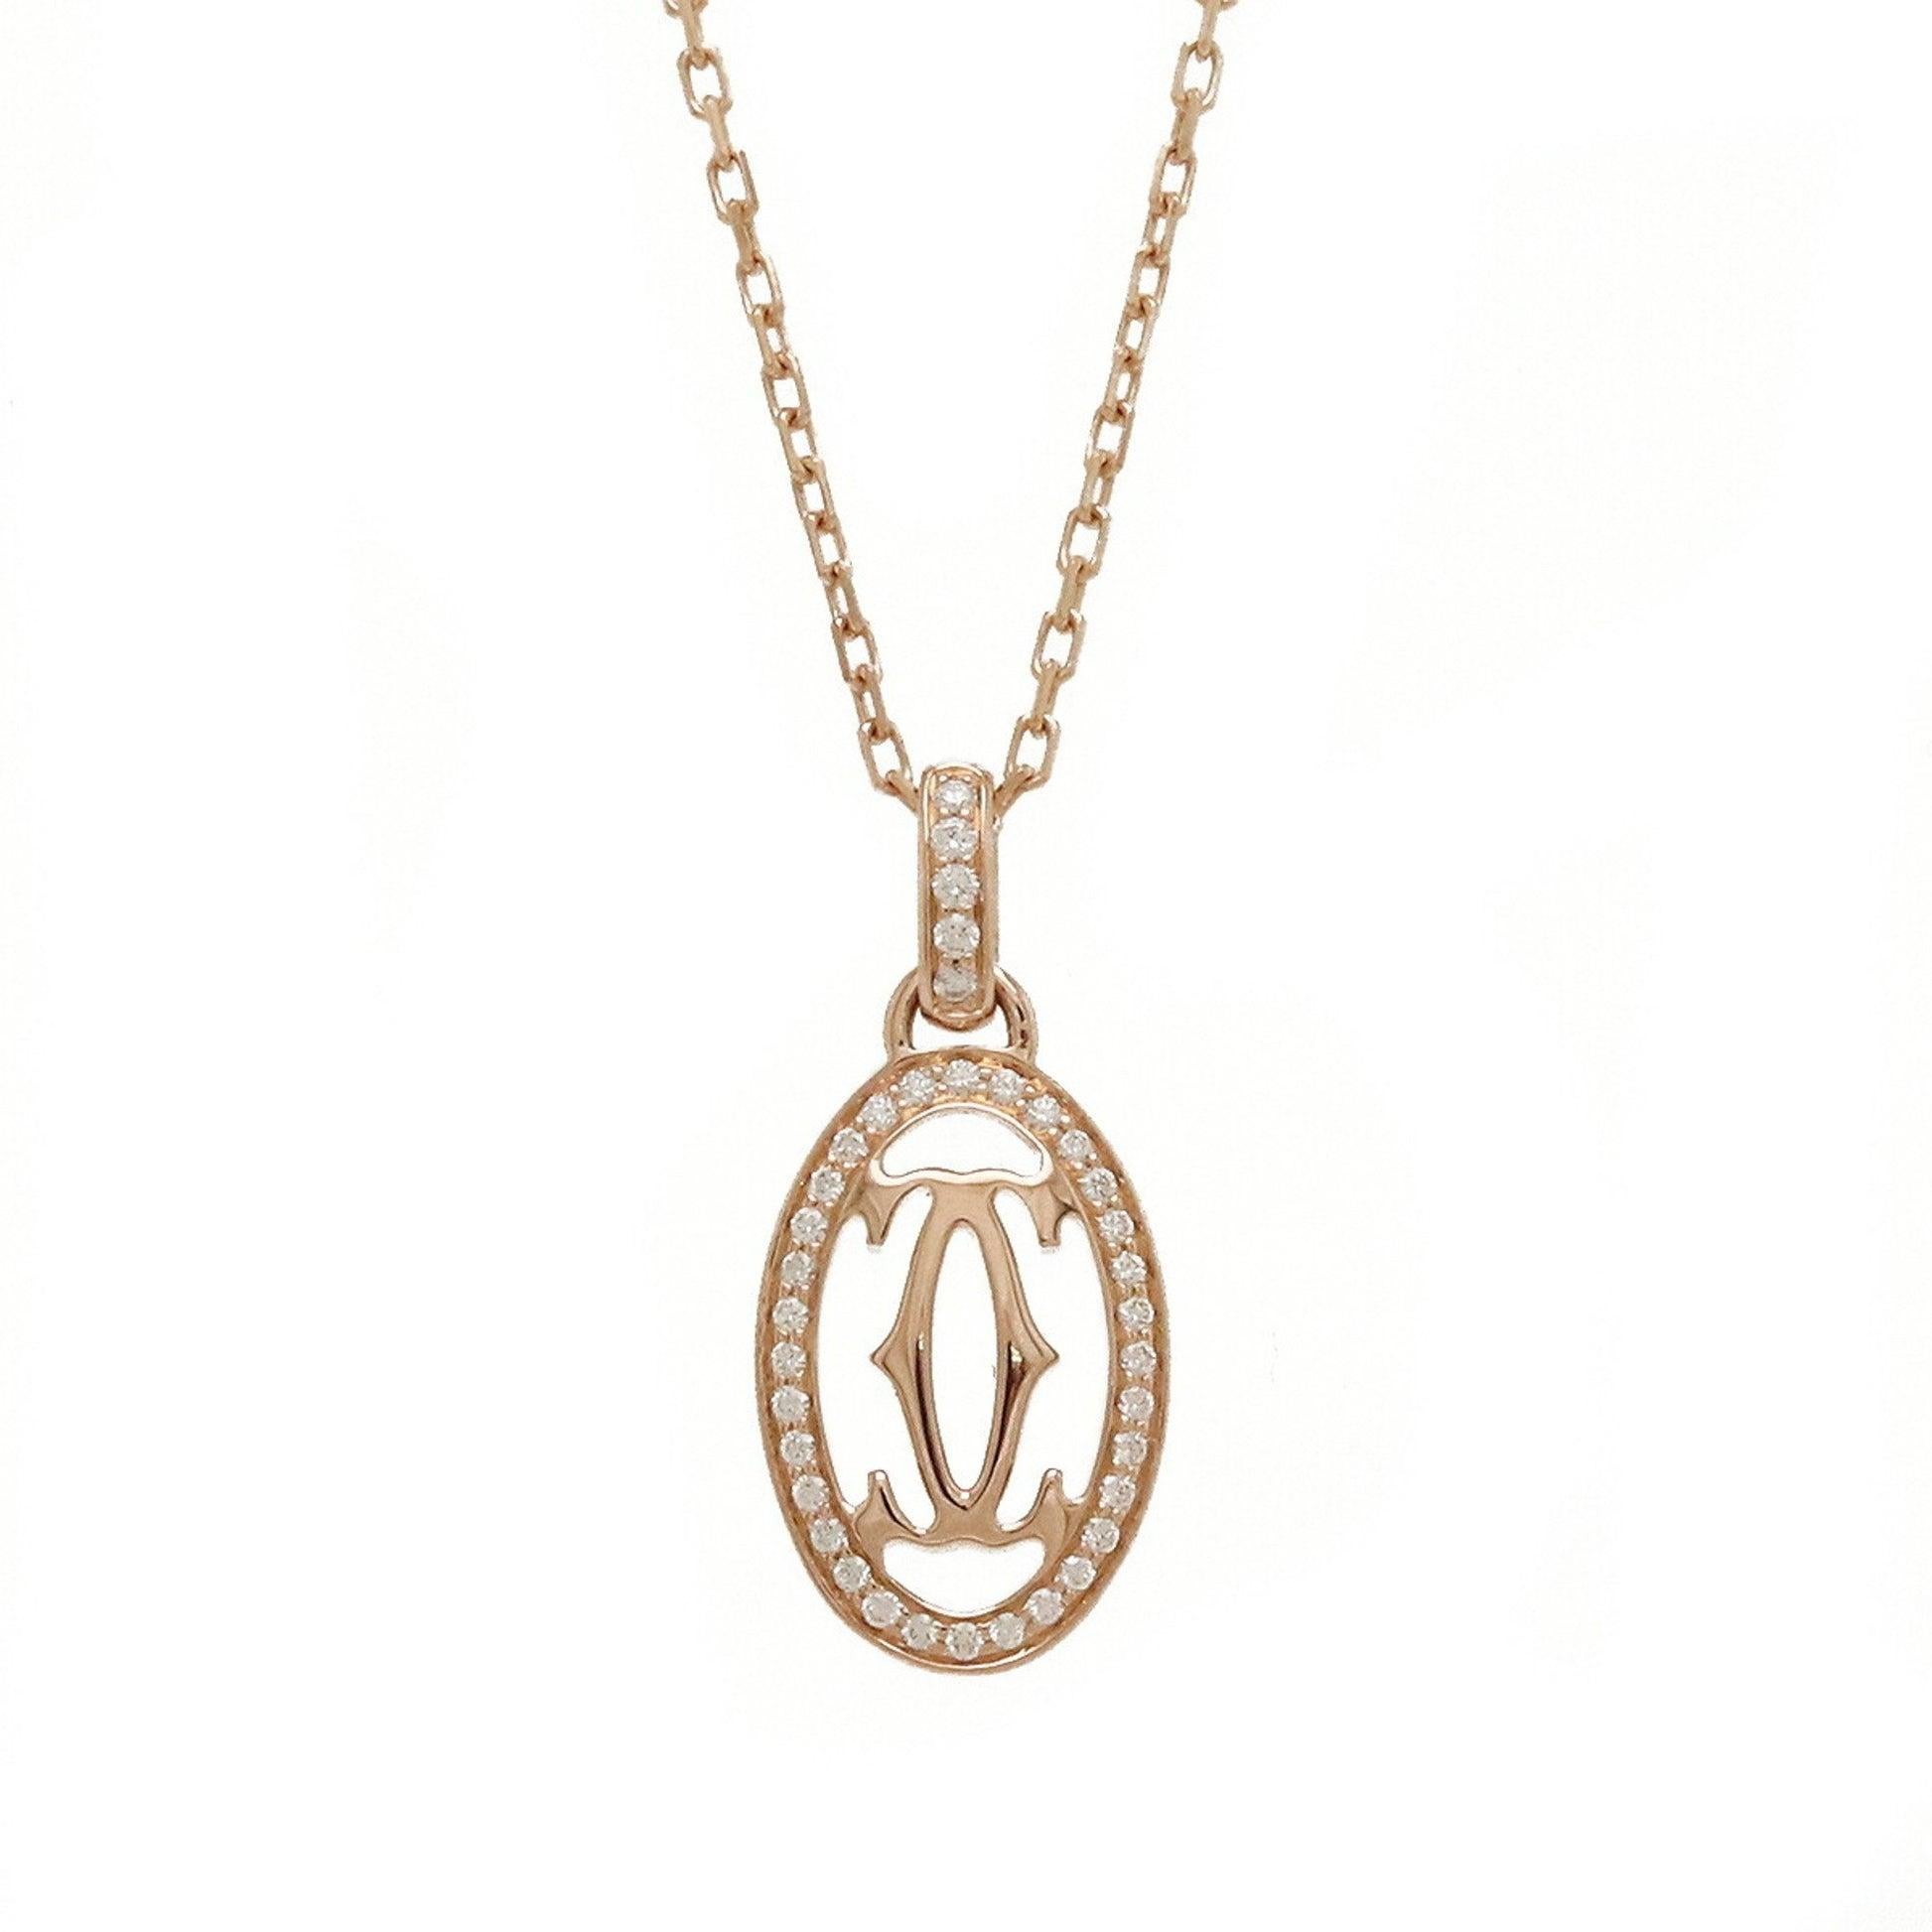 Cartier Double C Diamond Pendant Necklace in 18K Pink Gold

Additional Information:
Brand: Cartier
Gender: Women
Gemstone: Diamond
Material: Pink gold (18K)
Condition: Excellent
Condition details: The item appears unused, with little to no signs of